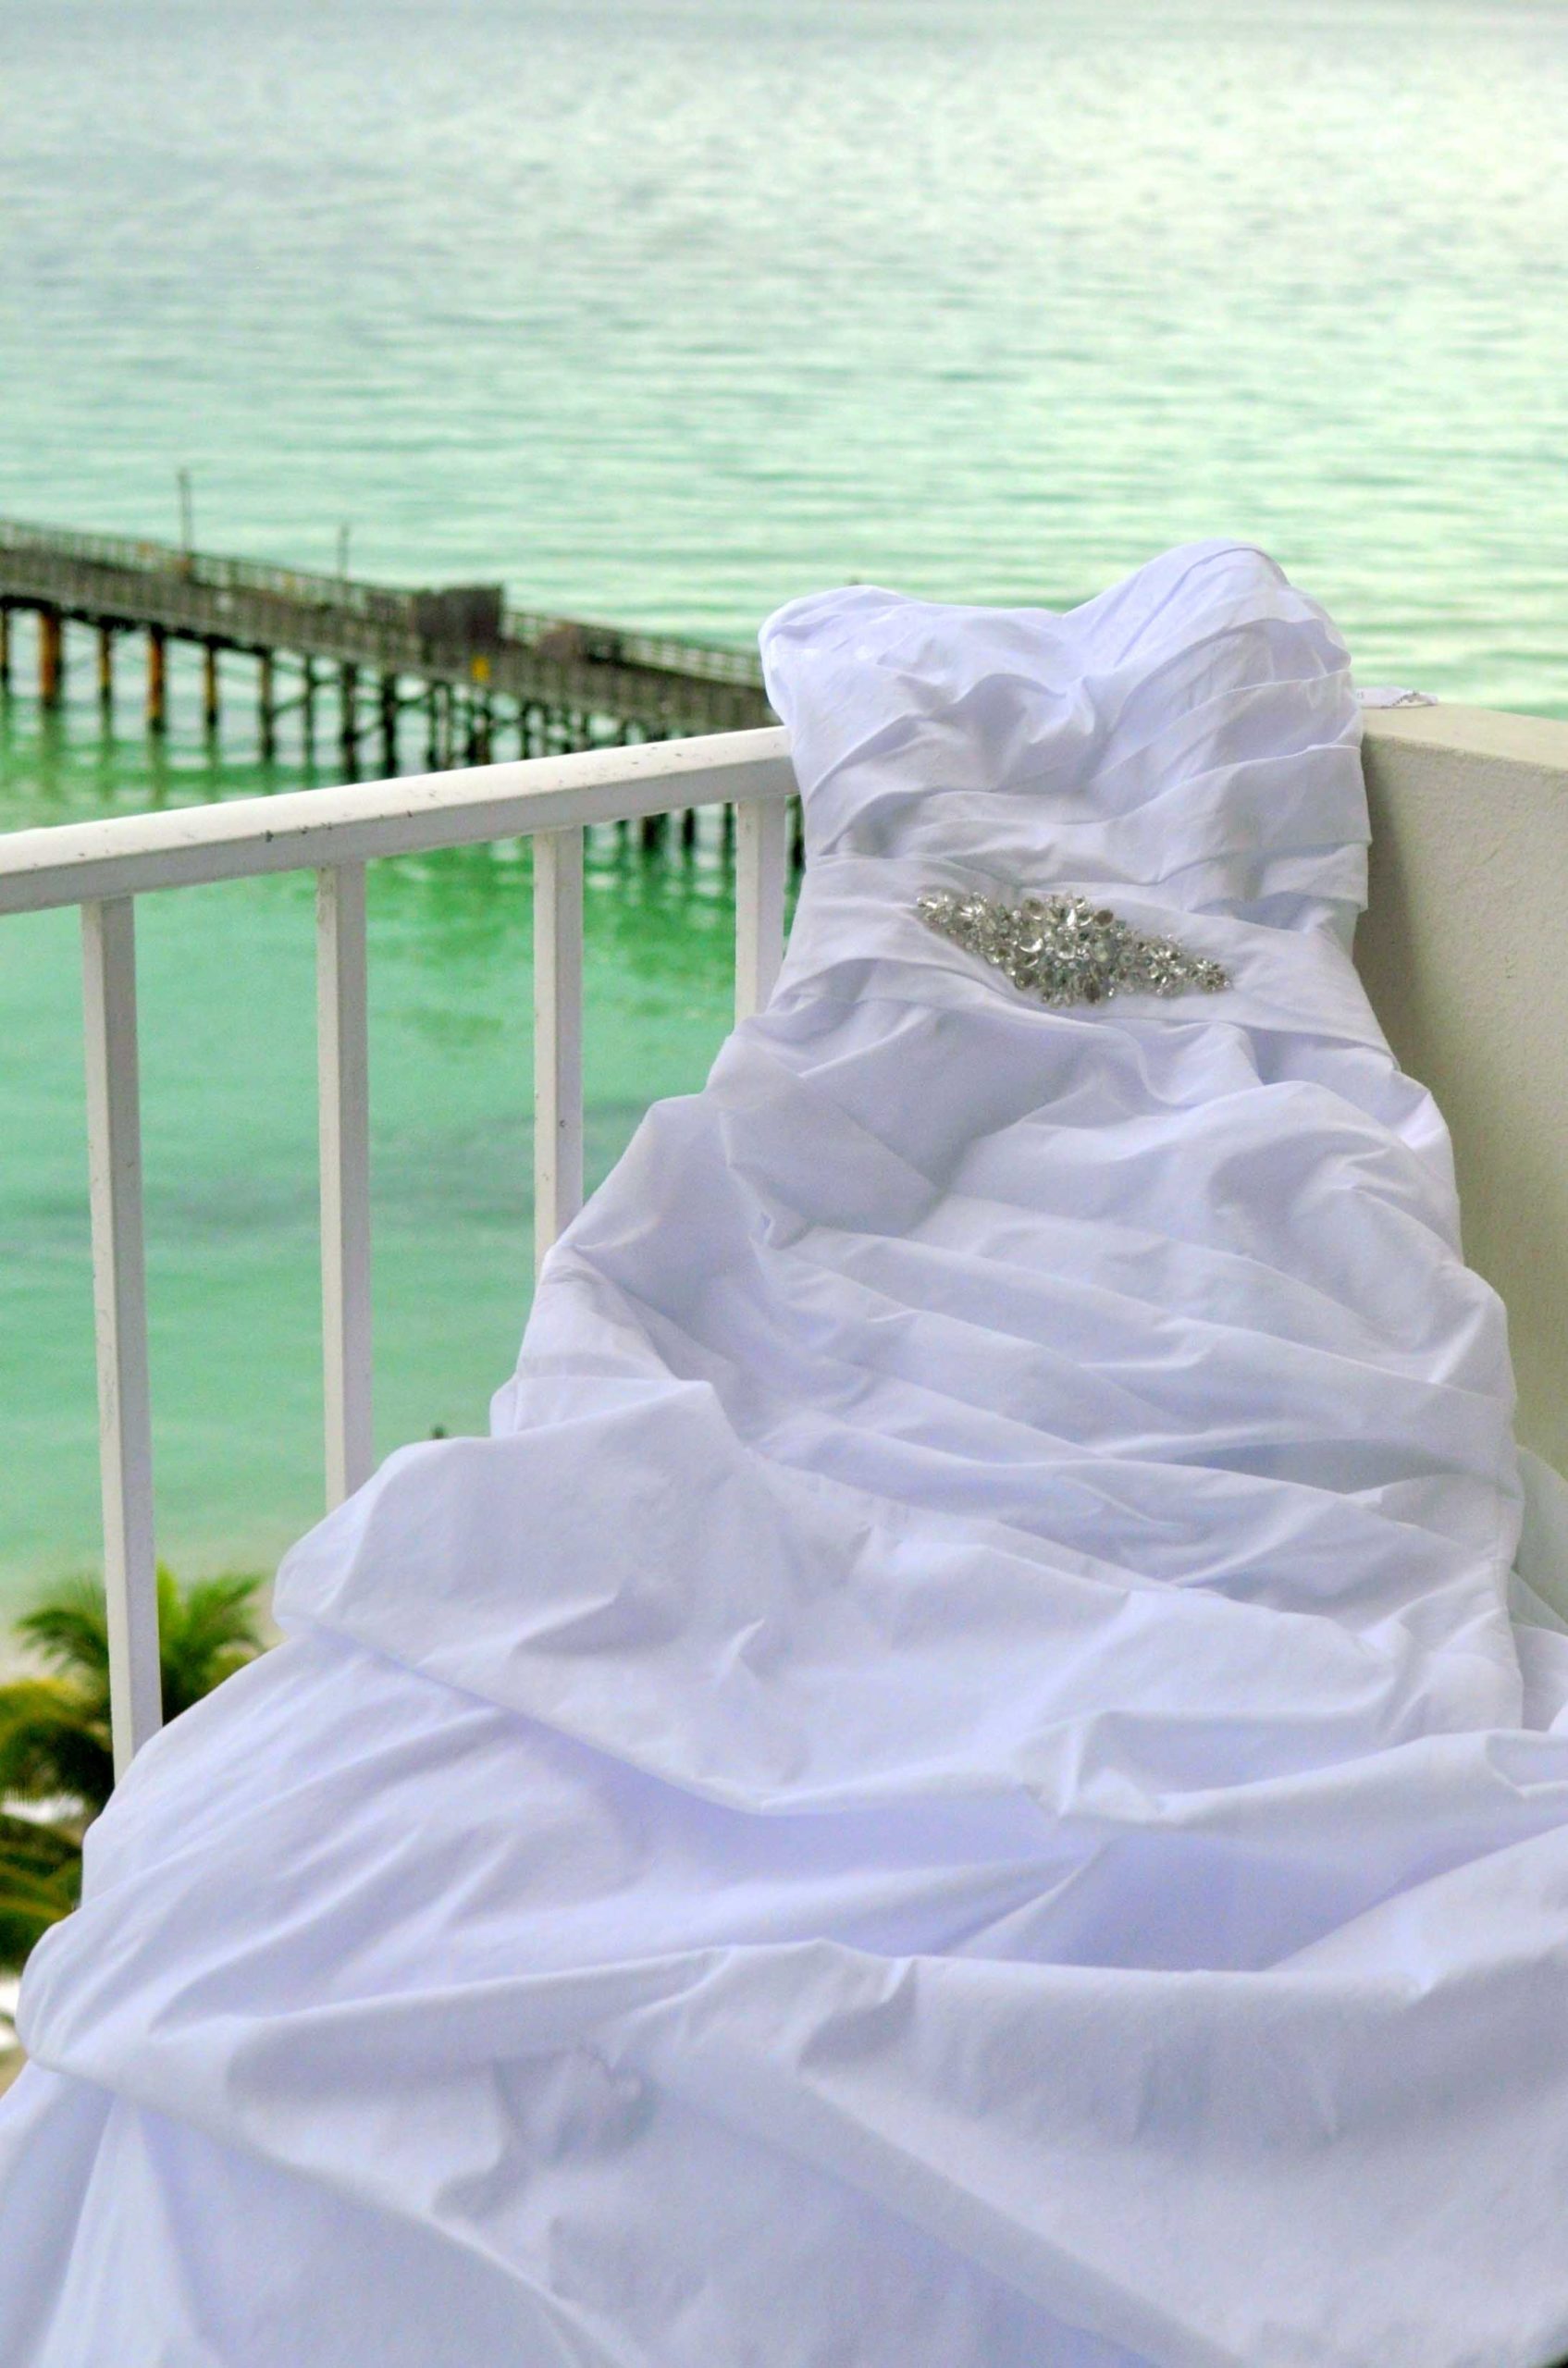 wedding gown on a balcony overlooking the beach and pier